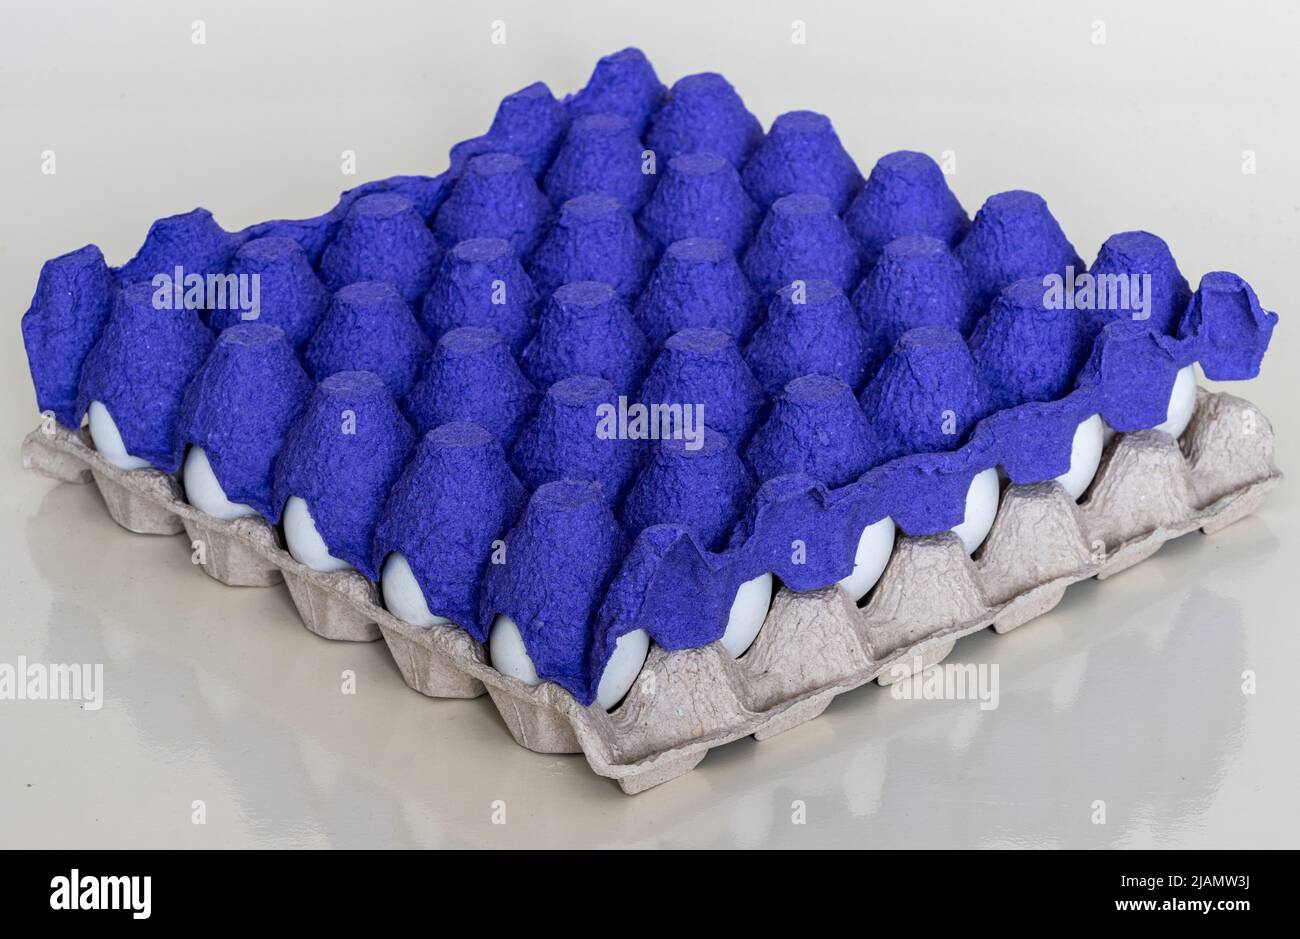 White chicken eggs in cardboard box. Packaged eggs to sell at the market. Isolated background Stock Photo